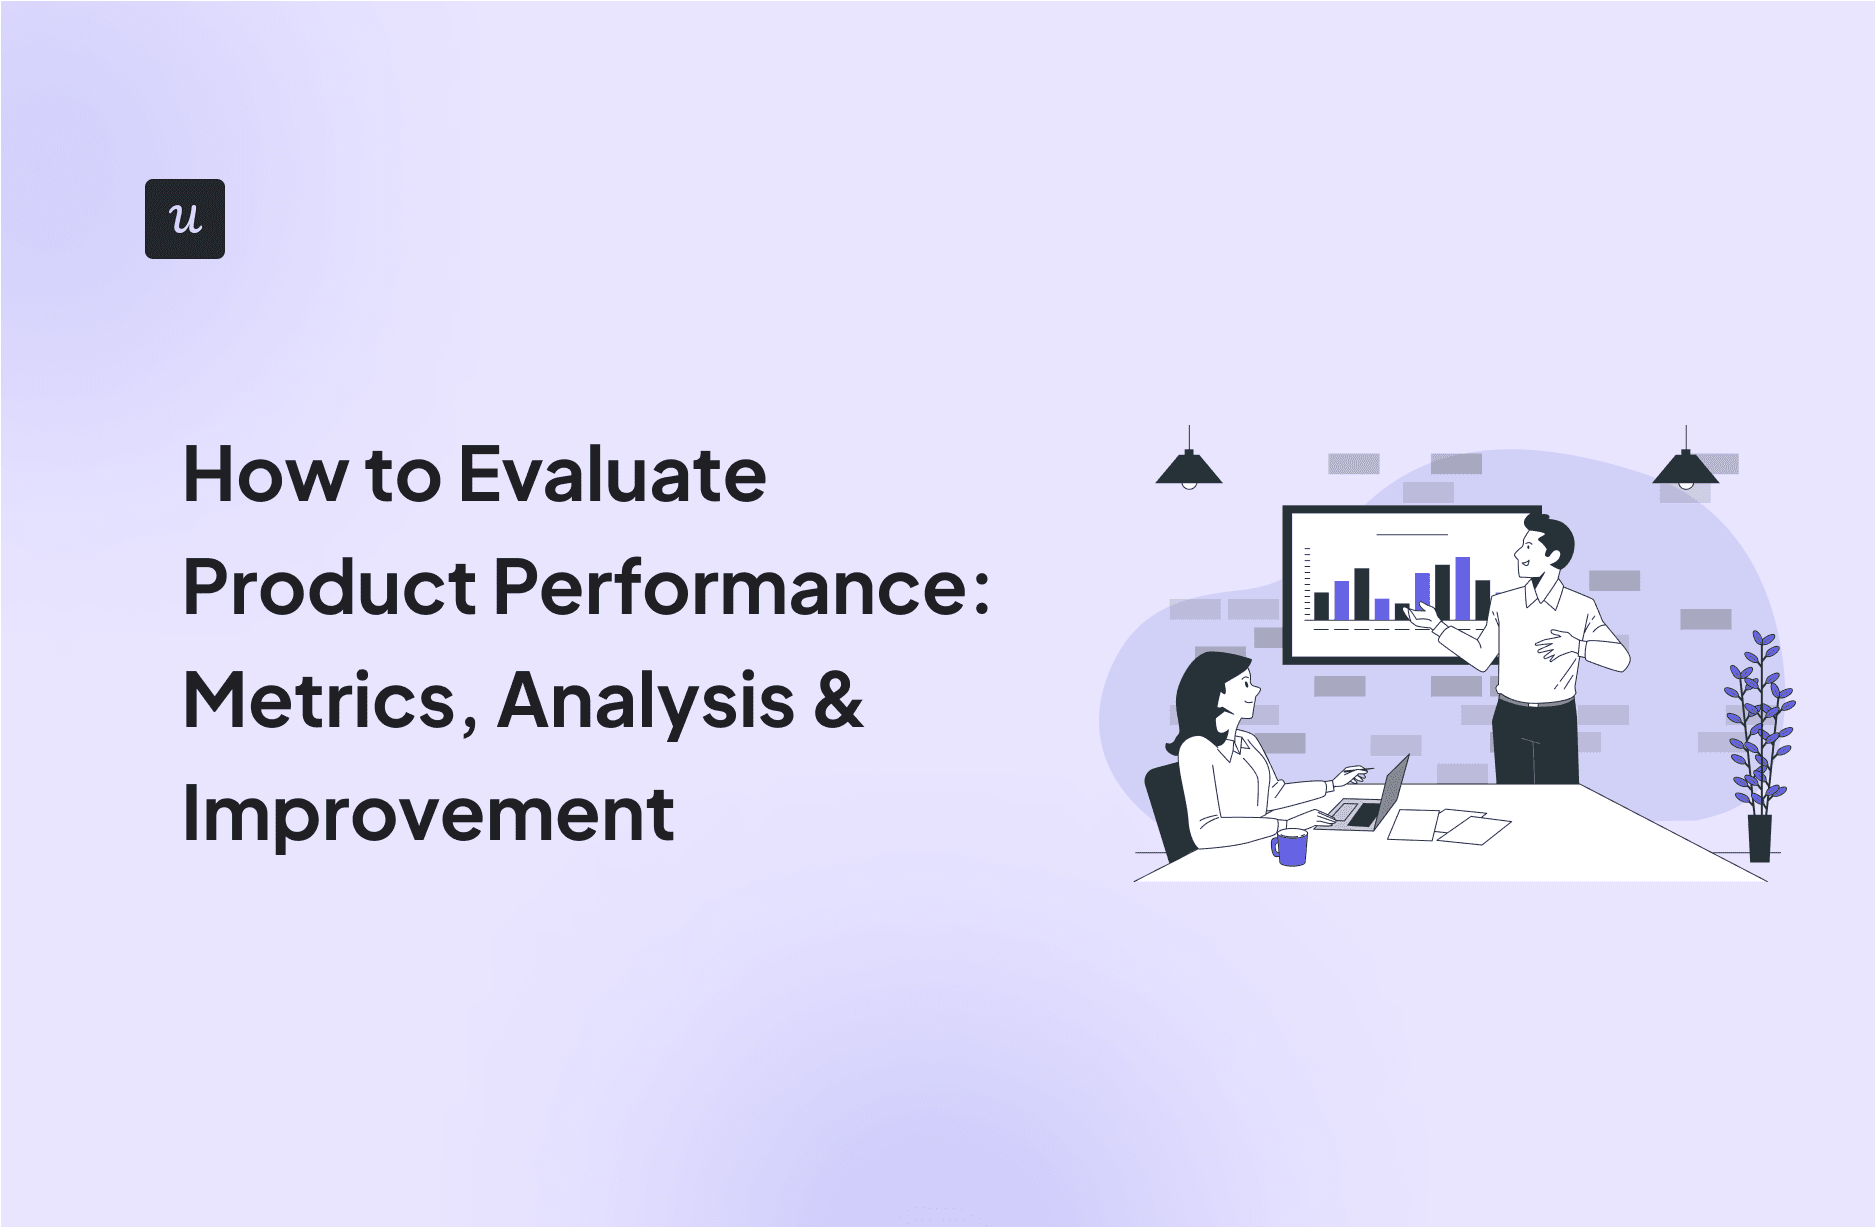 How to Evaluate Product Performance: Metrics, Analysis & Improvement cover